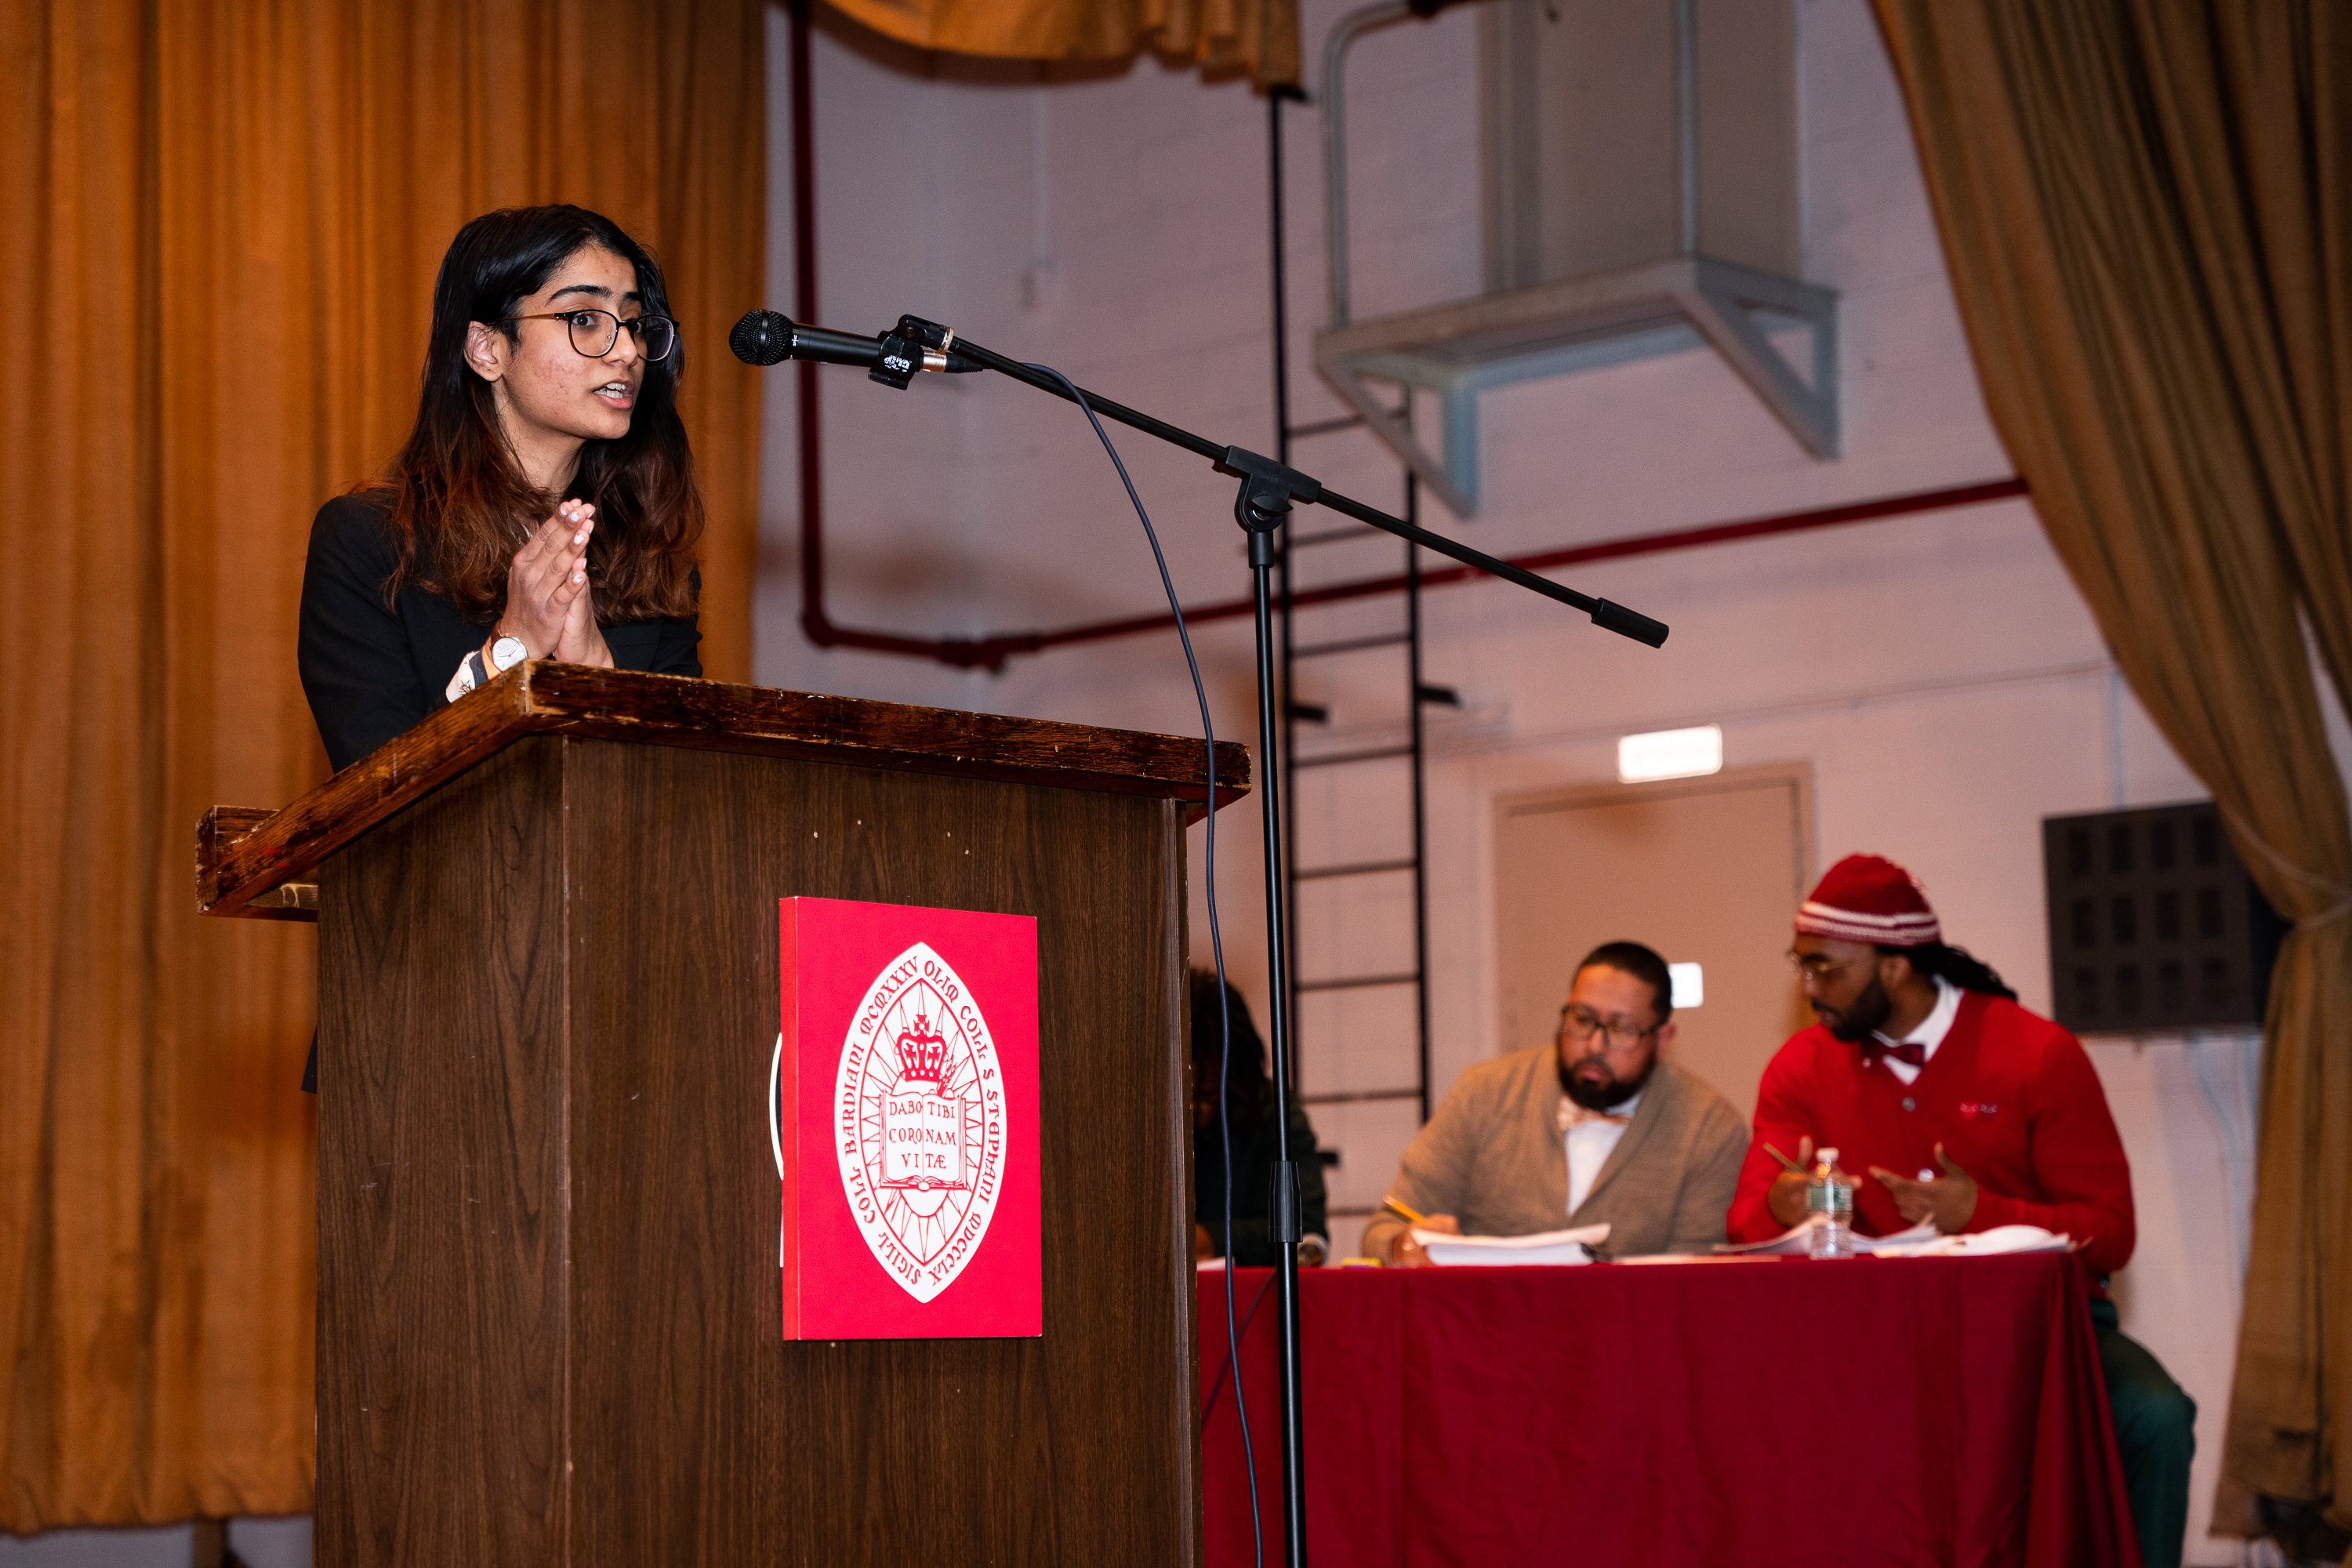 Penn debate student speaks at podium as members of the Bard Prison initiative are seen at a table to her left